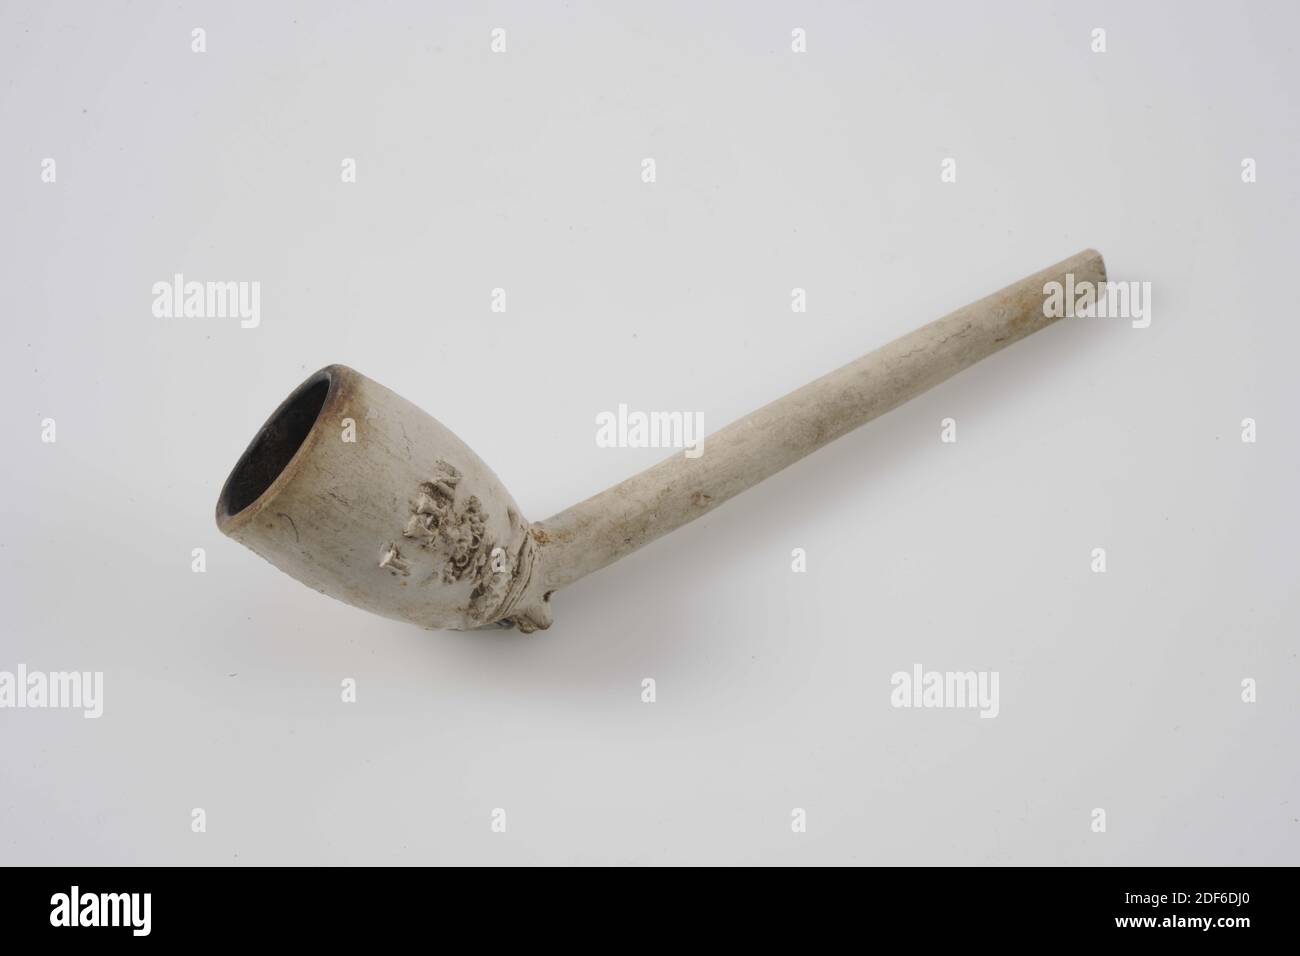 pipe (smoking utensils), Laurens Huijvenaar, 1760-1796, General: 3.9 x 2.7 x 11.6cm (39 x 27 x 116mm), fish, Tobacco pipe made of white pipe clay with embossed decoration on the head a sturgeon and three waves surmounted by a nine-pair crown and the letters IHN, 1938 Stock Photo